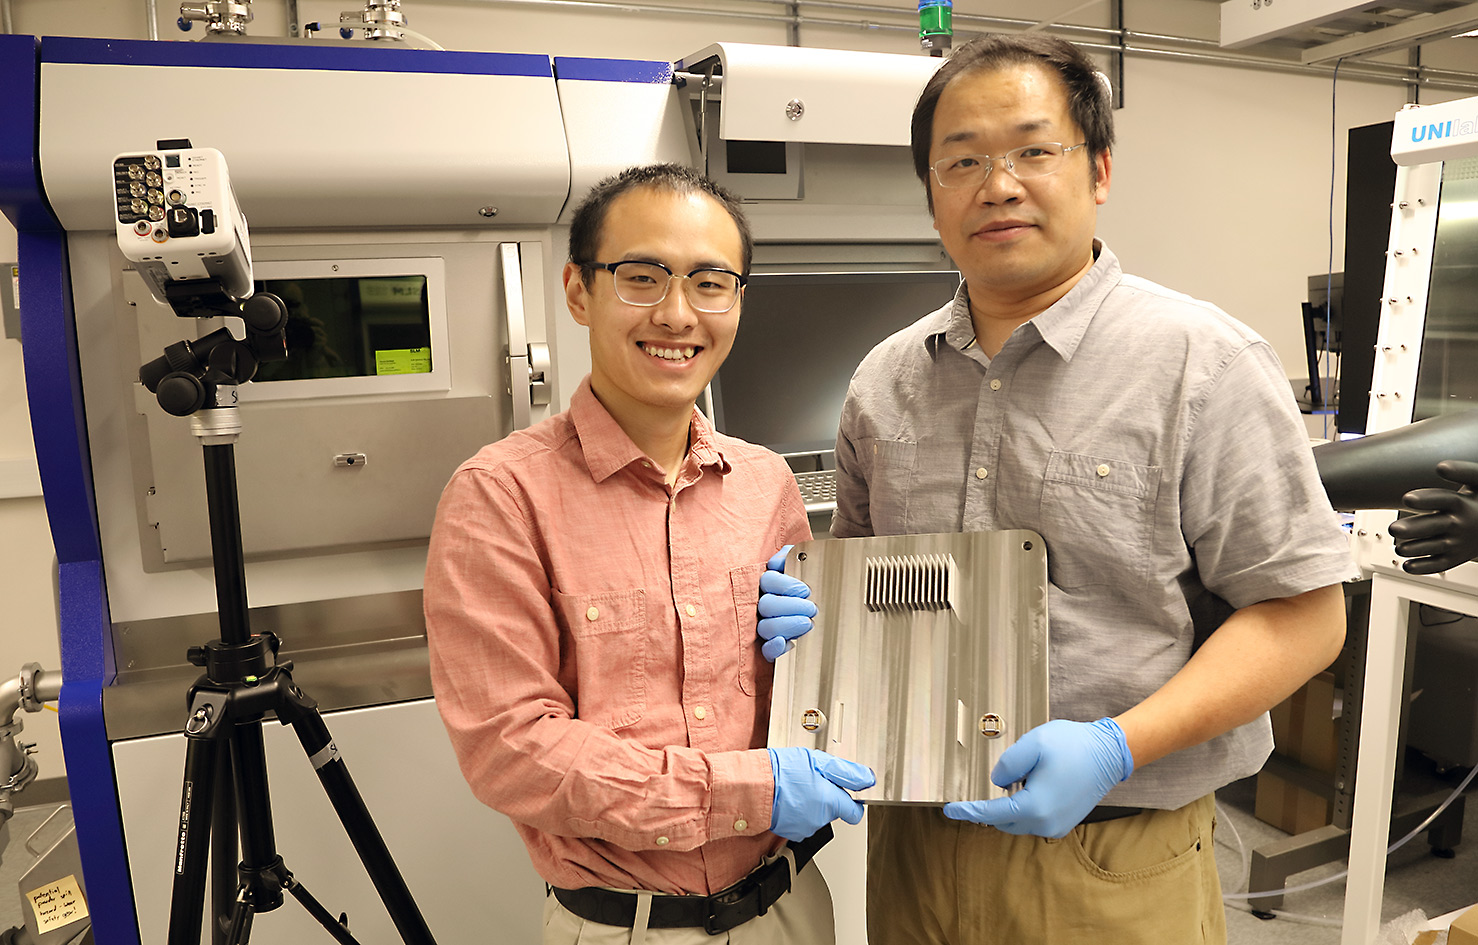 UVA materials science and engineering postdoctoral fellow Zhongshu Ren, left, and Tao Sun display the results of their research. Ren is the first author of the Science journal article. 